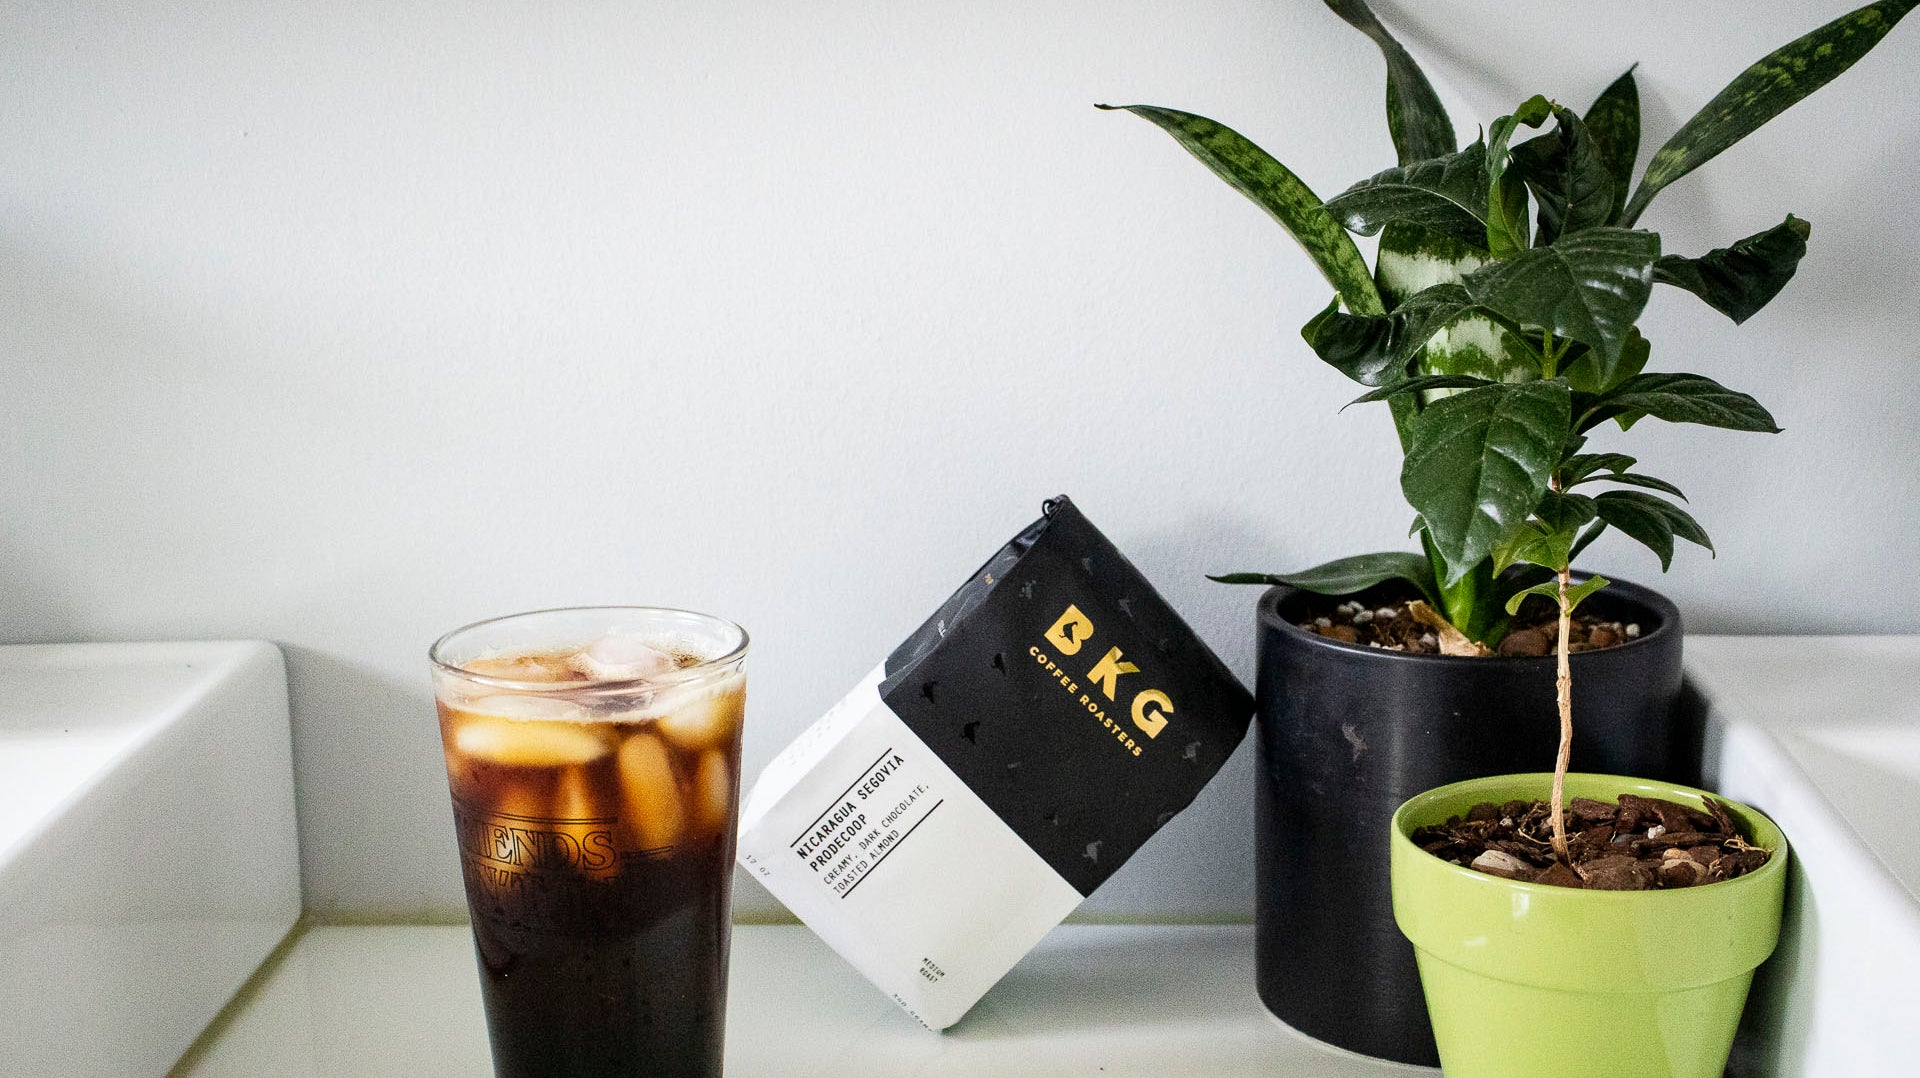 Learn all the tricks and hack on brewing iced coffee with your Hario v60 pour over at home